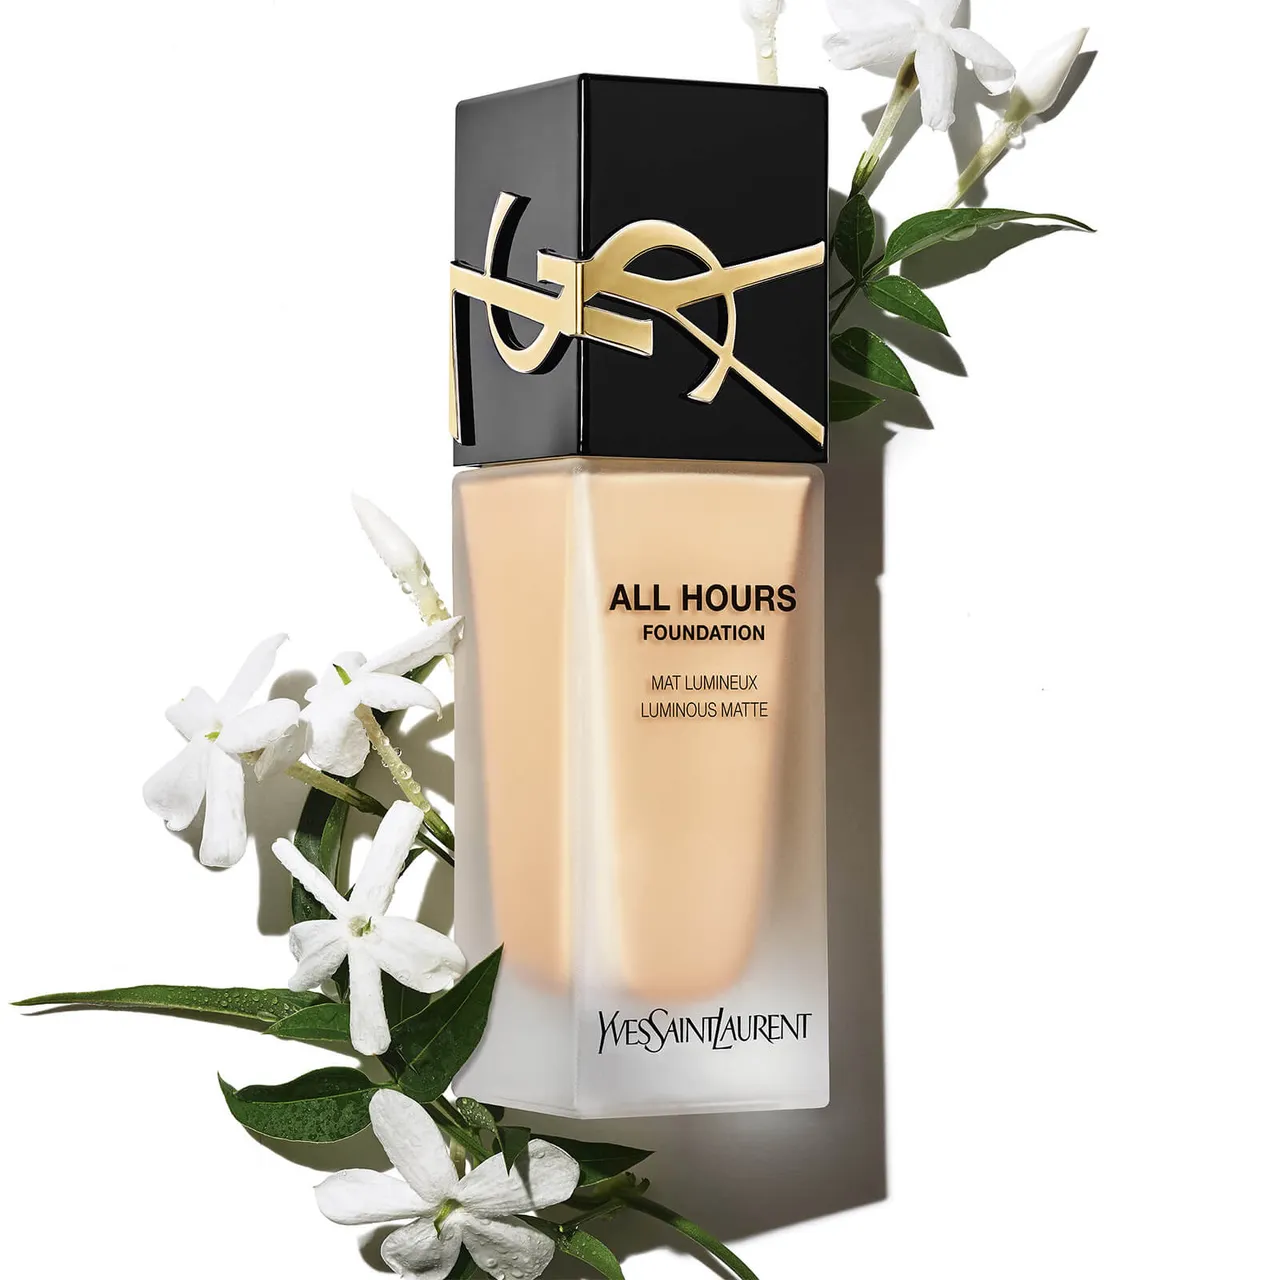 Yves Saint Laurent All Hours Luminous Matte Foundation with SPF 39 25ml (Various Shades) - MC5